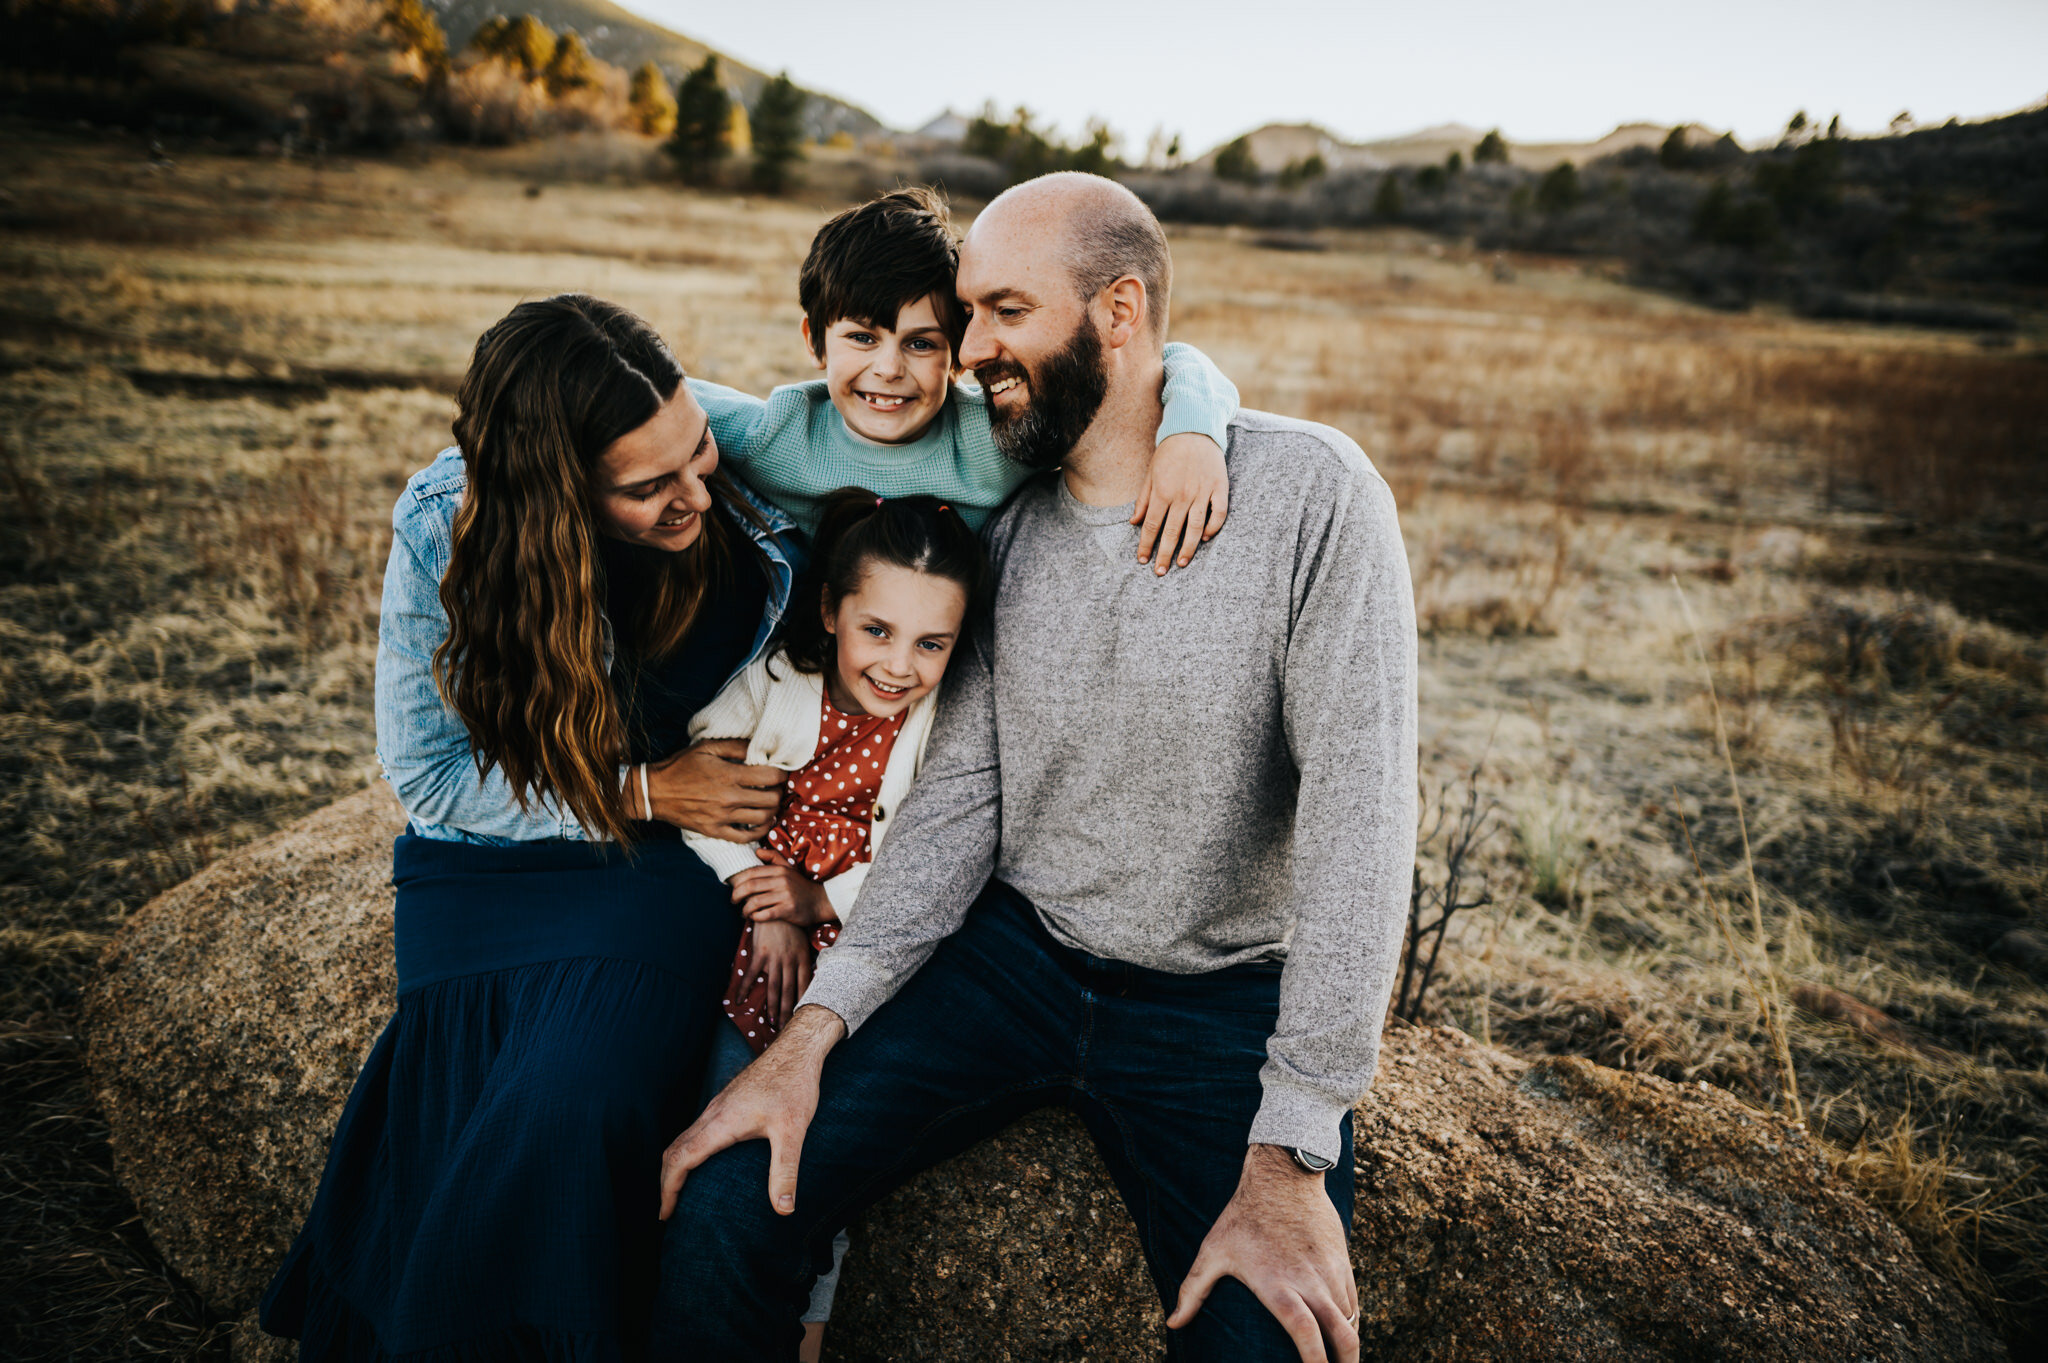 Lisa Liberati Family Session Colorado Springs Photographer Sunset Cheyenne Canyon Mother Father Son Daughter Wild Prairie Photography-2-2020.jpg